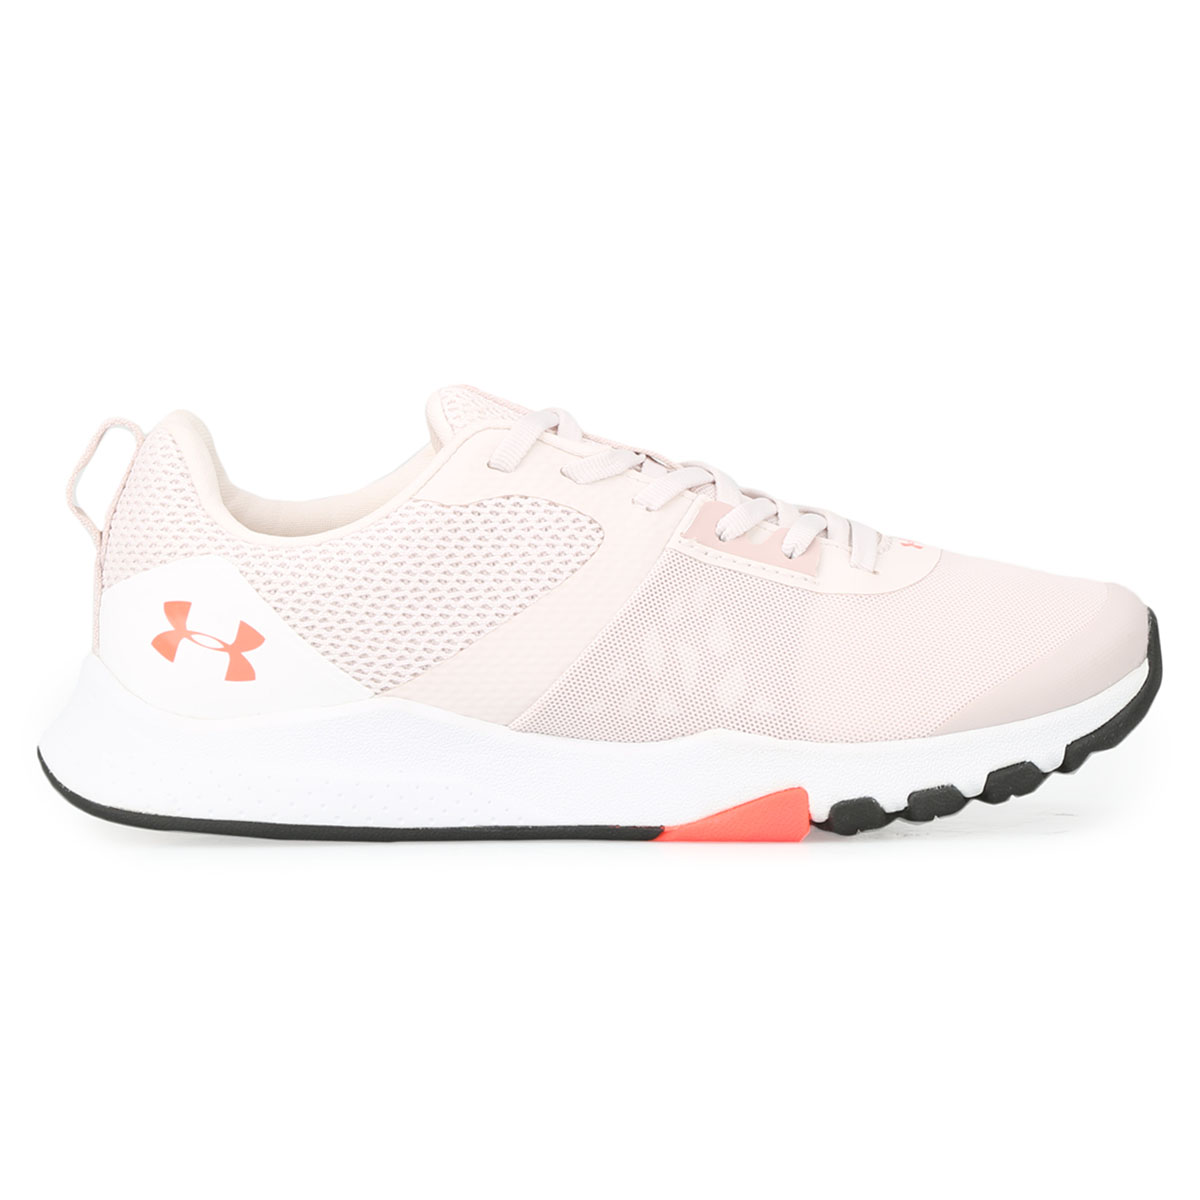 Zapatillas Under Armour Tri Base Edge,  image number null